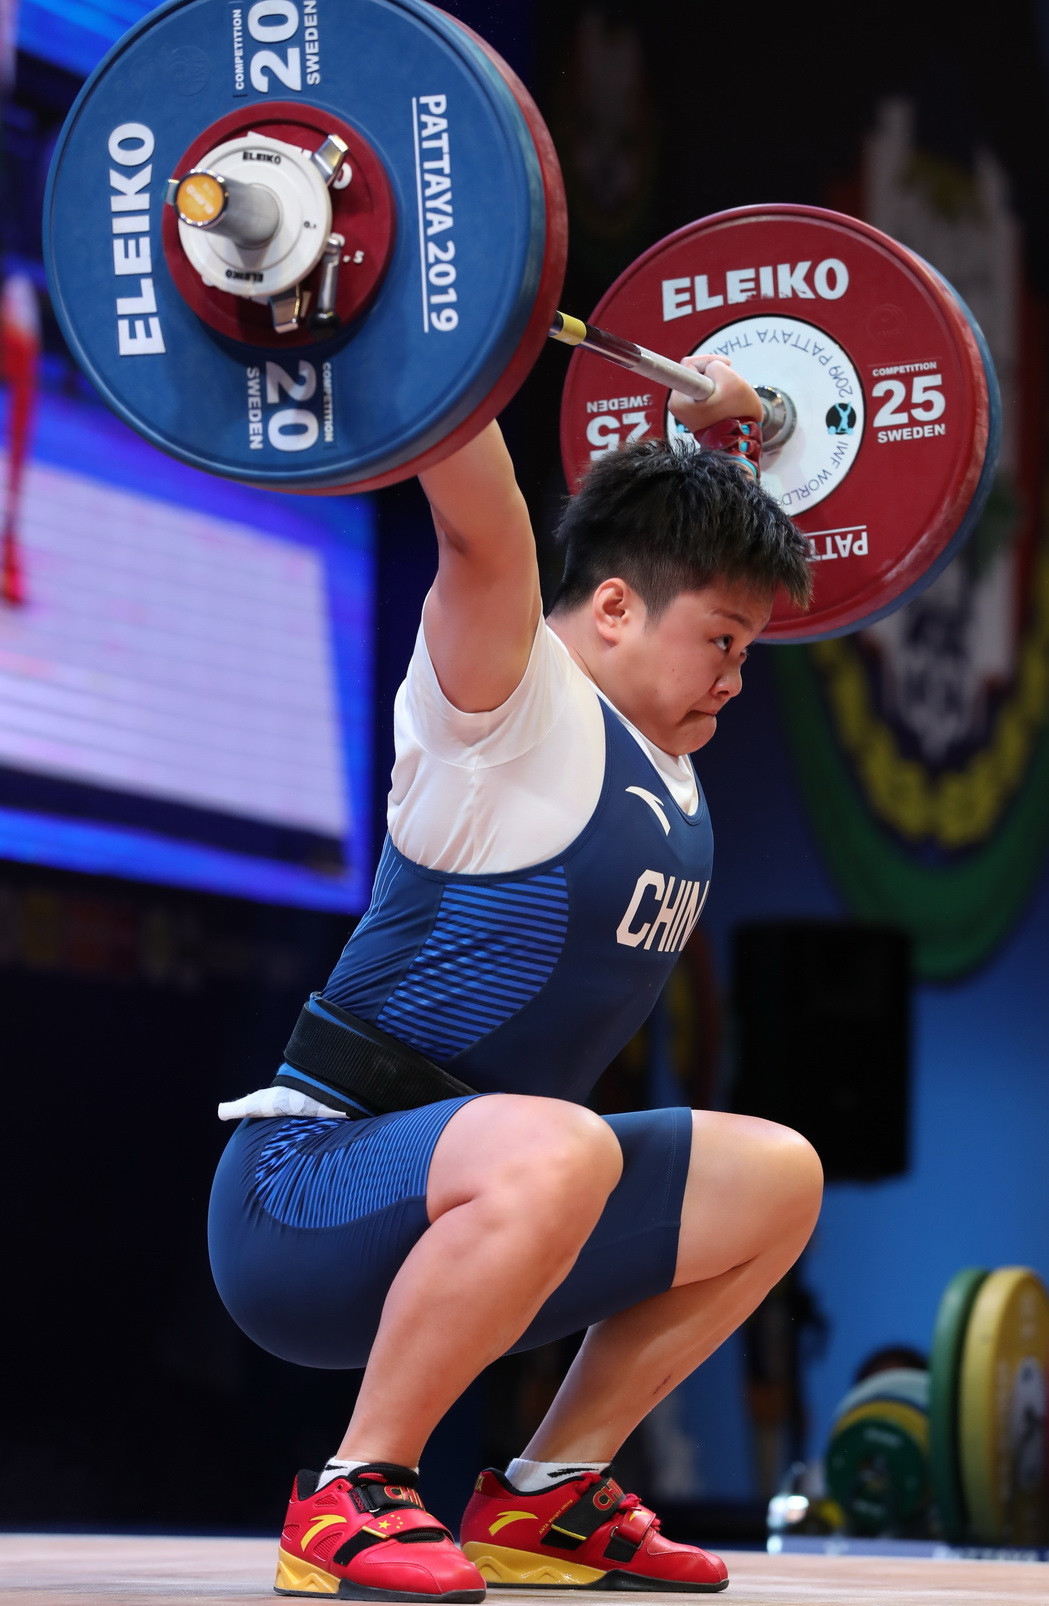 Wang had jumped up two bodyweight categories from last year's triumph in the 76kg competition ©IWF